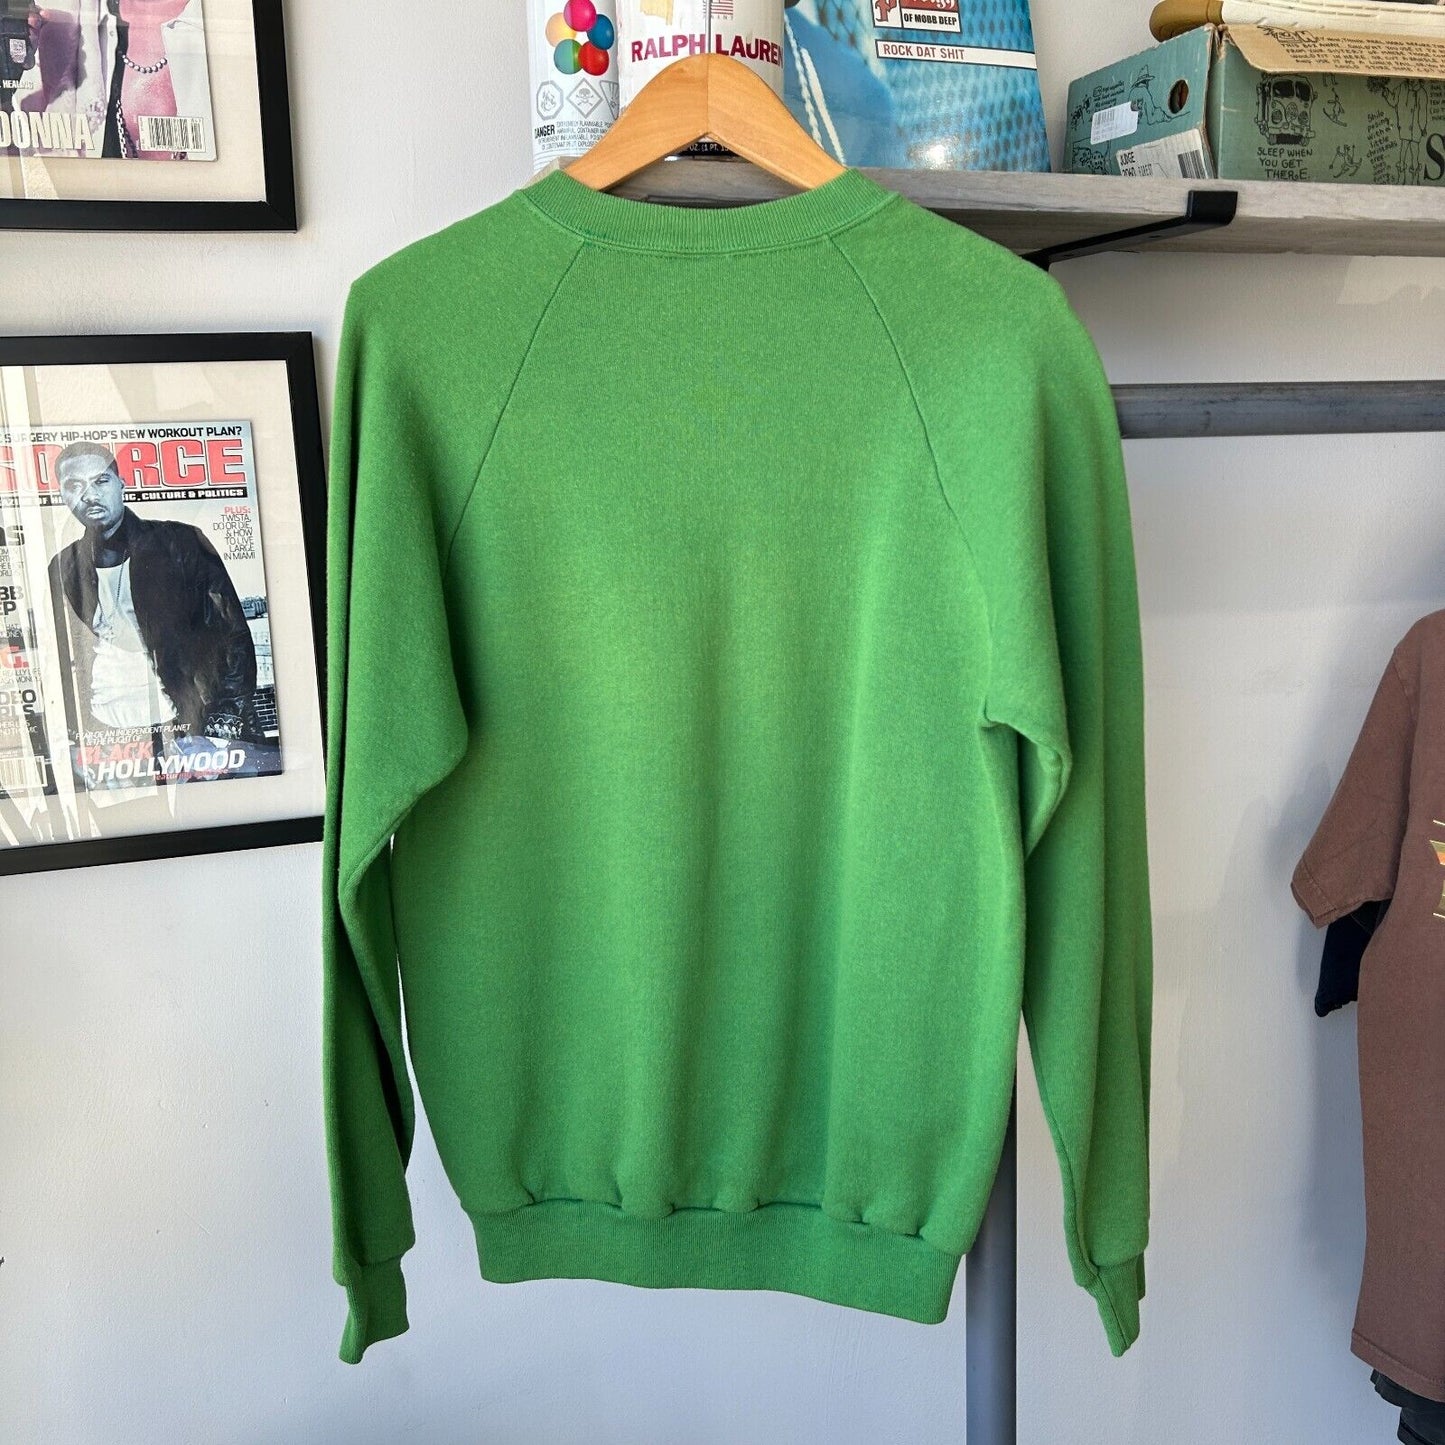 VINTAGE 80s | From The Old School Crewneck Sweater sz M Adult